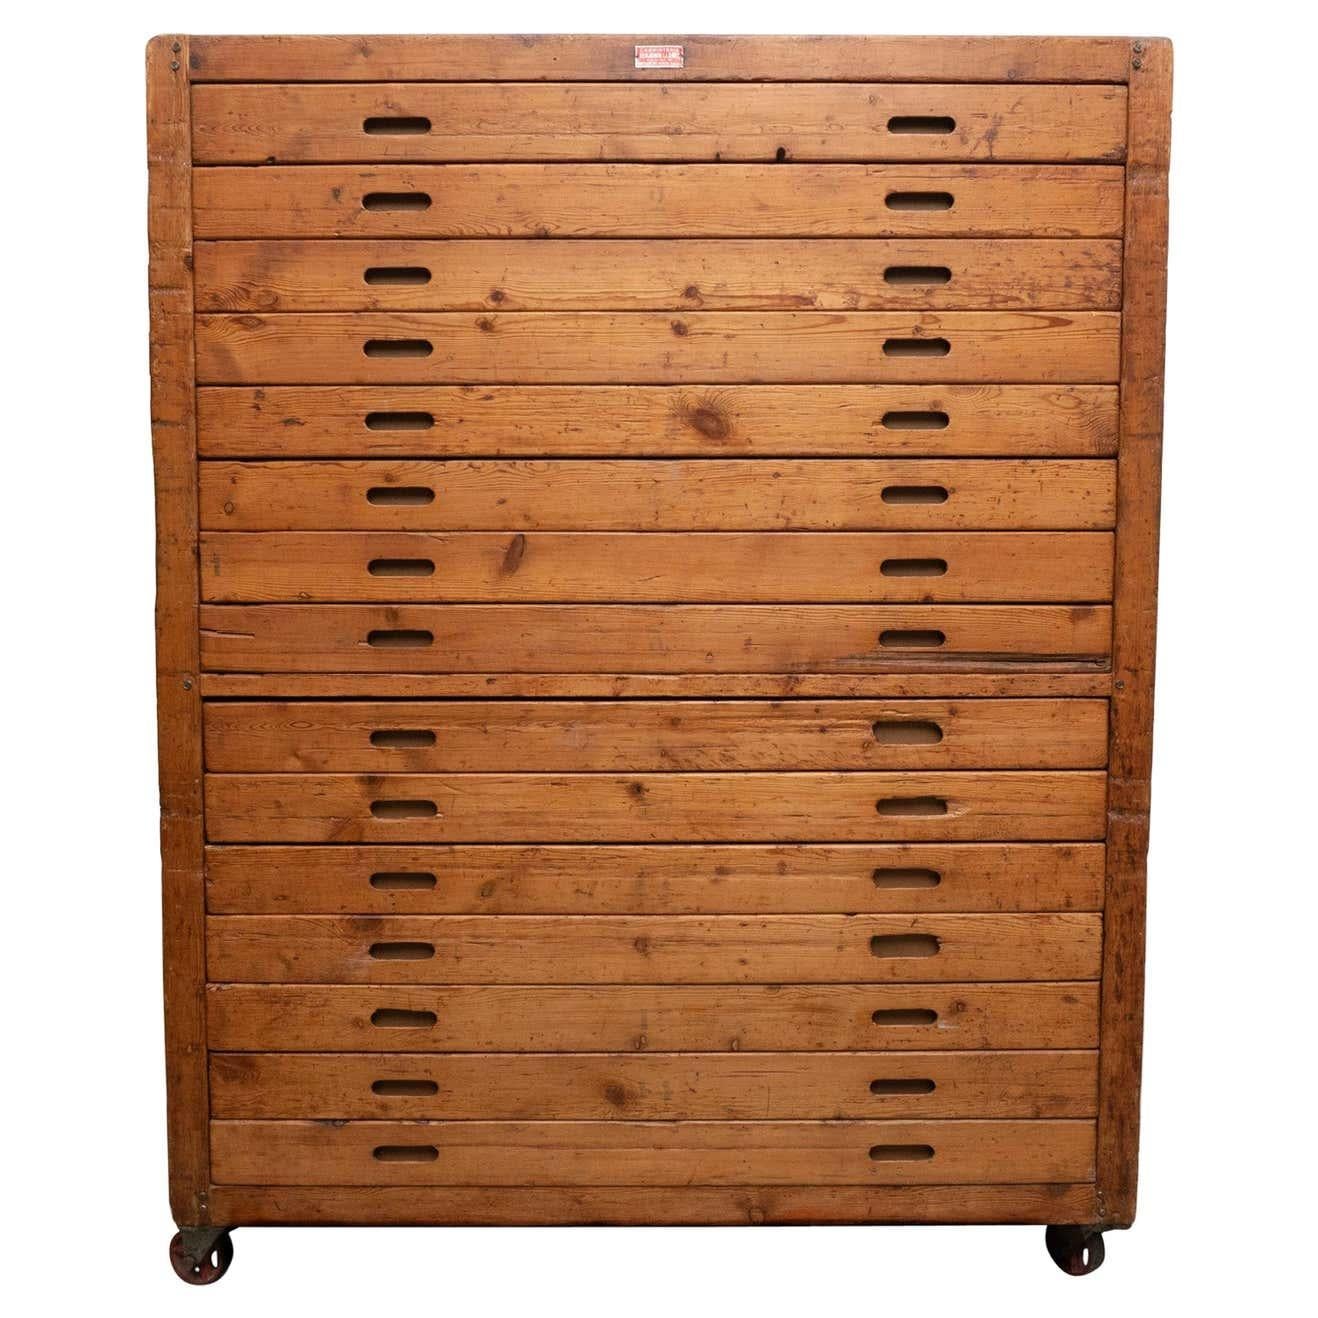 Bakery cabinet from 20th century.
Manufactured by Benjamin LLobet, Spain.

In original condition, with minor wear consistent with age and use, preserving a beautiful patina.

Materials:
Wood

Dimensions:
D 65 cm x W 154 cm x H 198 cm.